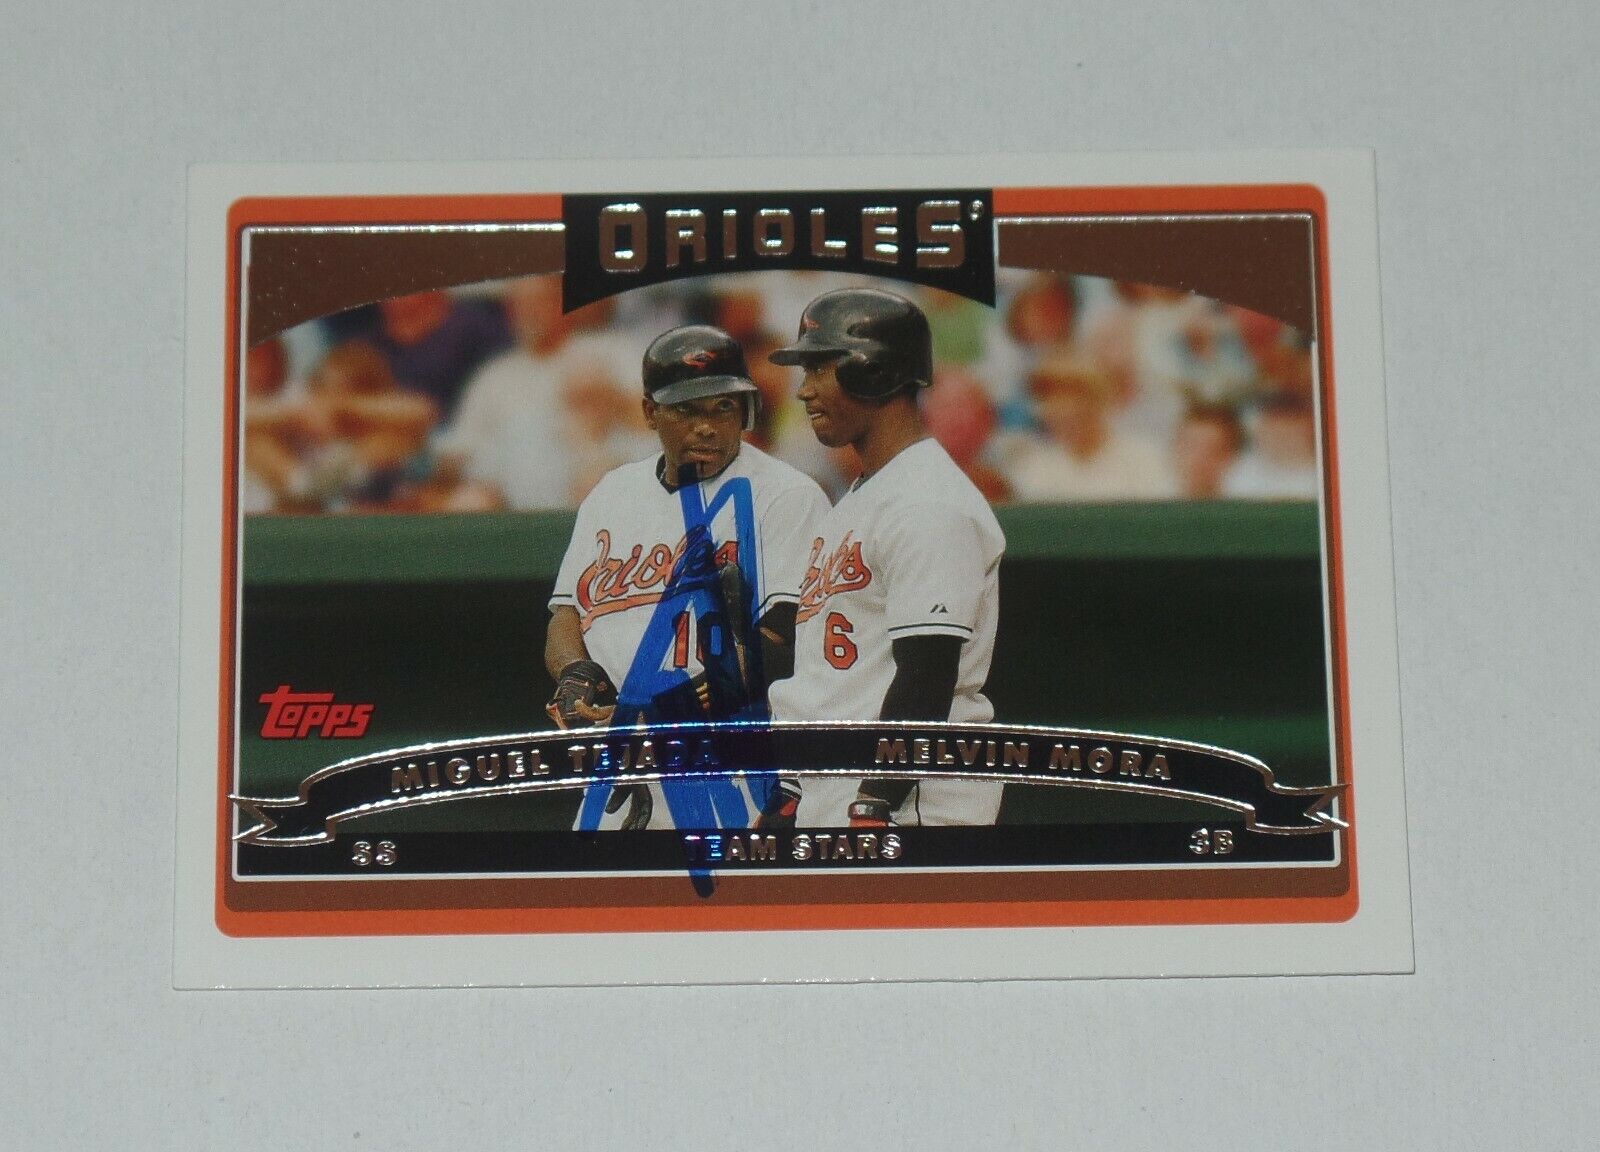 MIGUEL TEJADA SIGNED AUTO\'D 2006 TOPPS CARD #327 BALTIMORE ORIOLES GIANTS A\'S